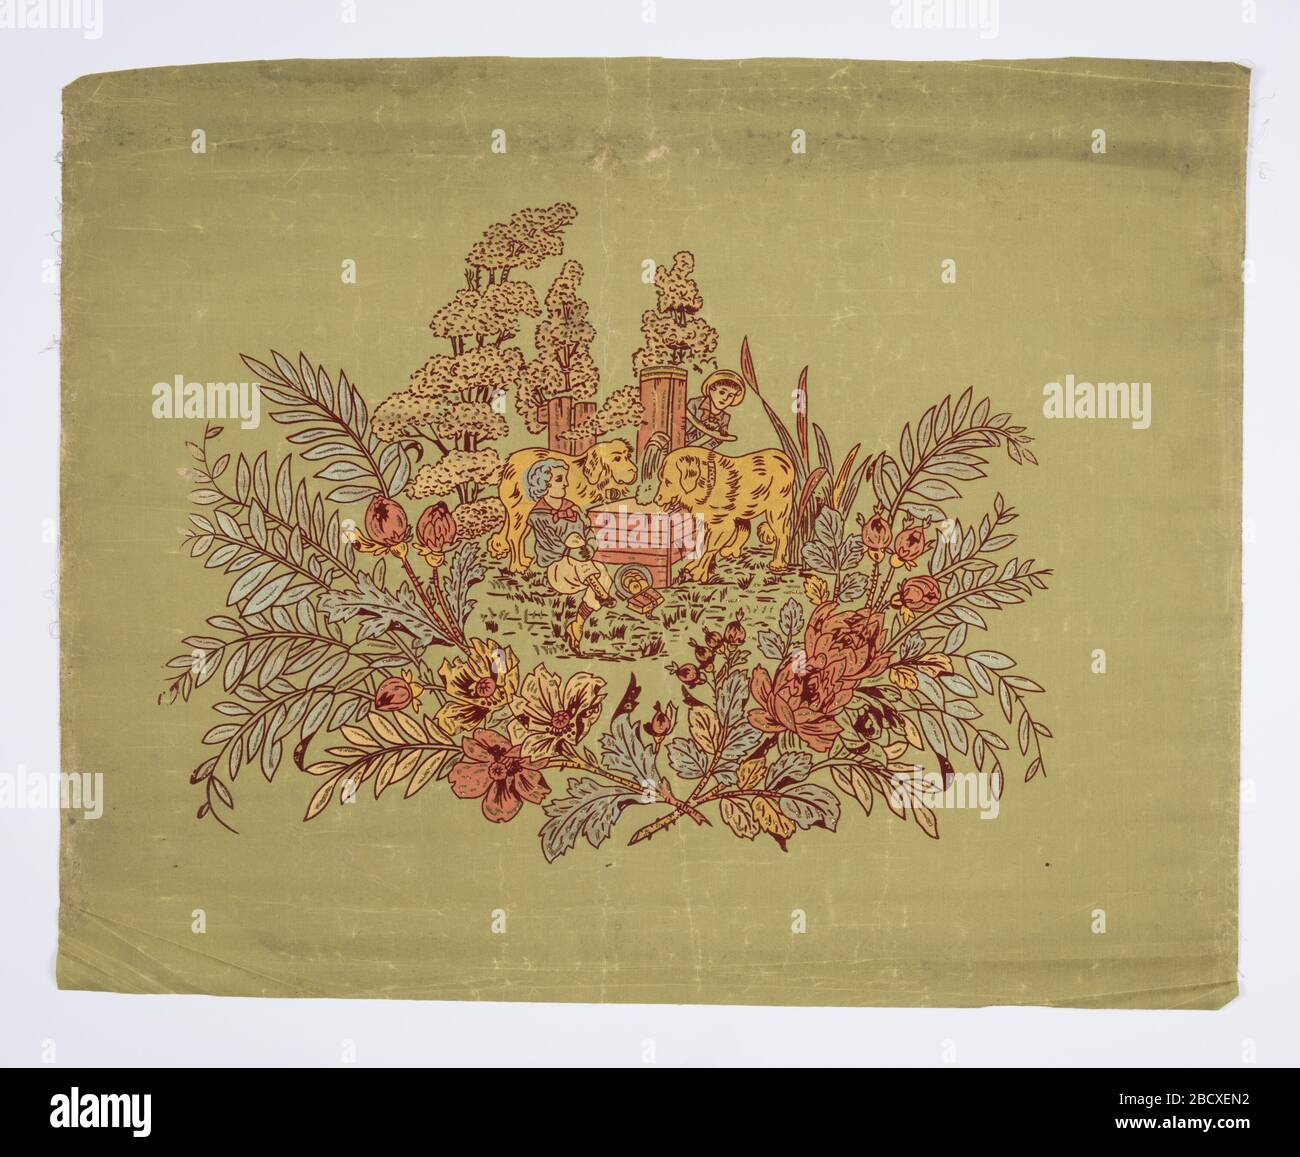 Window shade. Research in ProgressTwo boys and two large dogs at watering trough. Surrounded by foliage. Printed in metallic colors and burgundy flock on light green fabric support. Flitter shade with applied gold mica flakes. Window shade Stock Photo